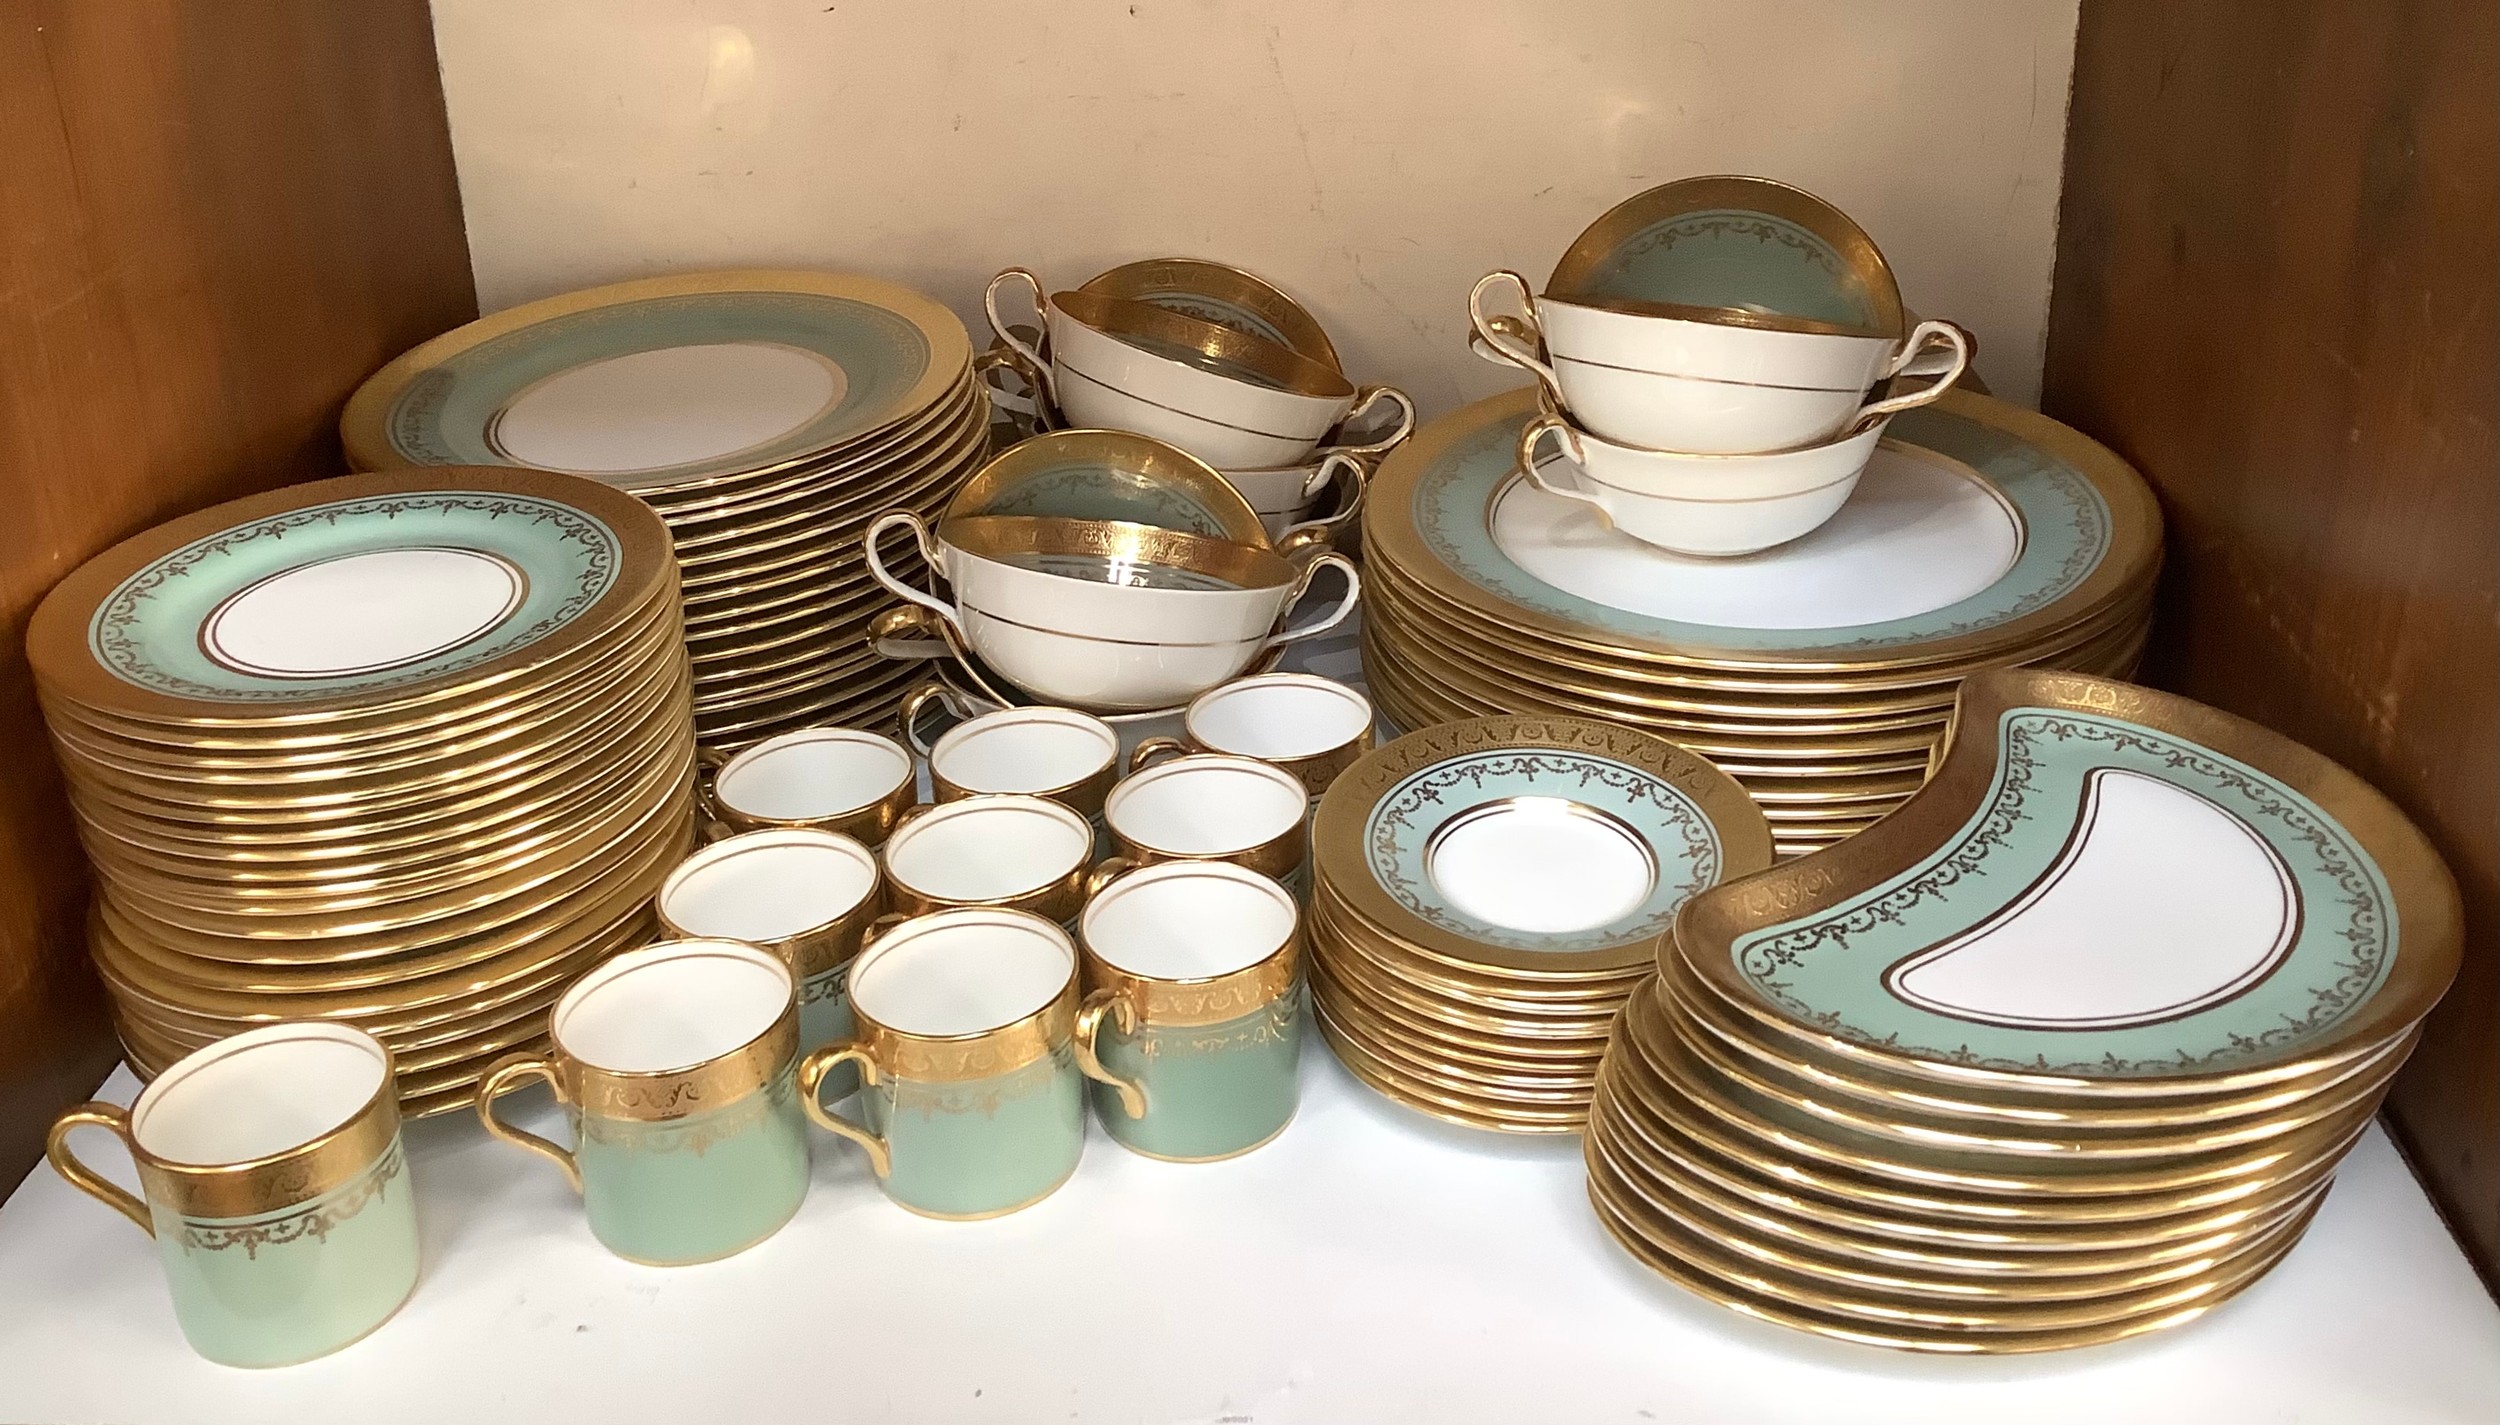 An Aynsley part dinner and coffee service, decorated in a green, white and gilded design and